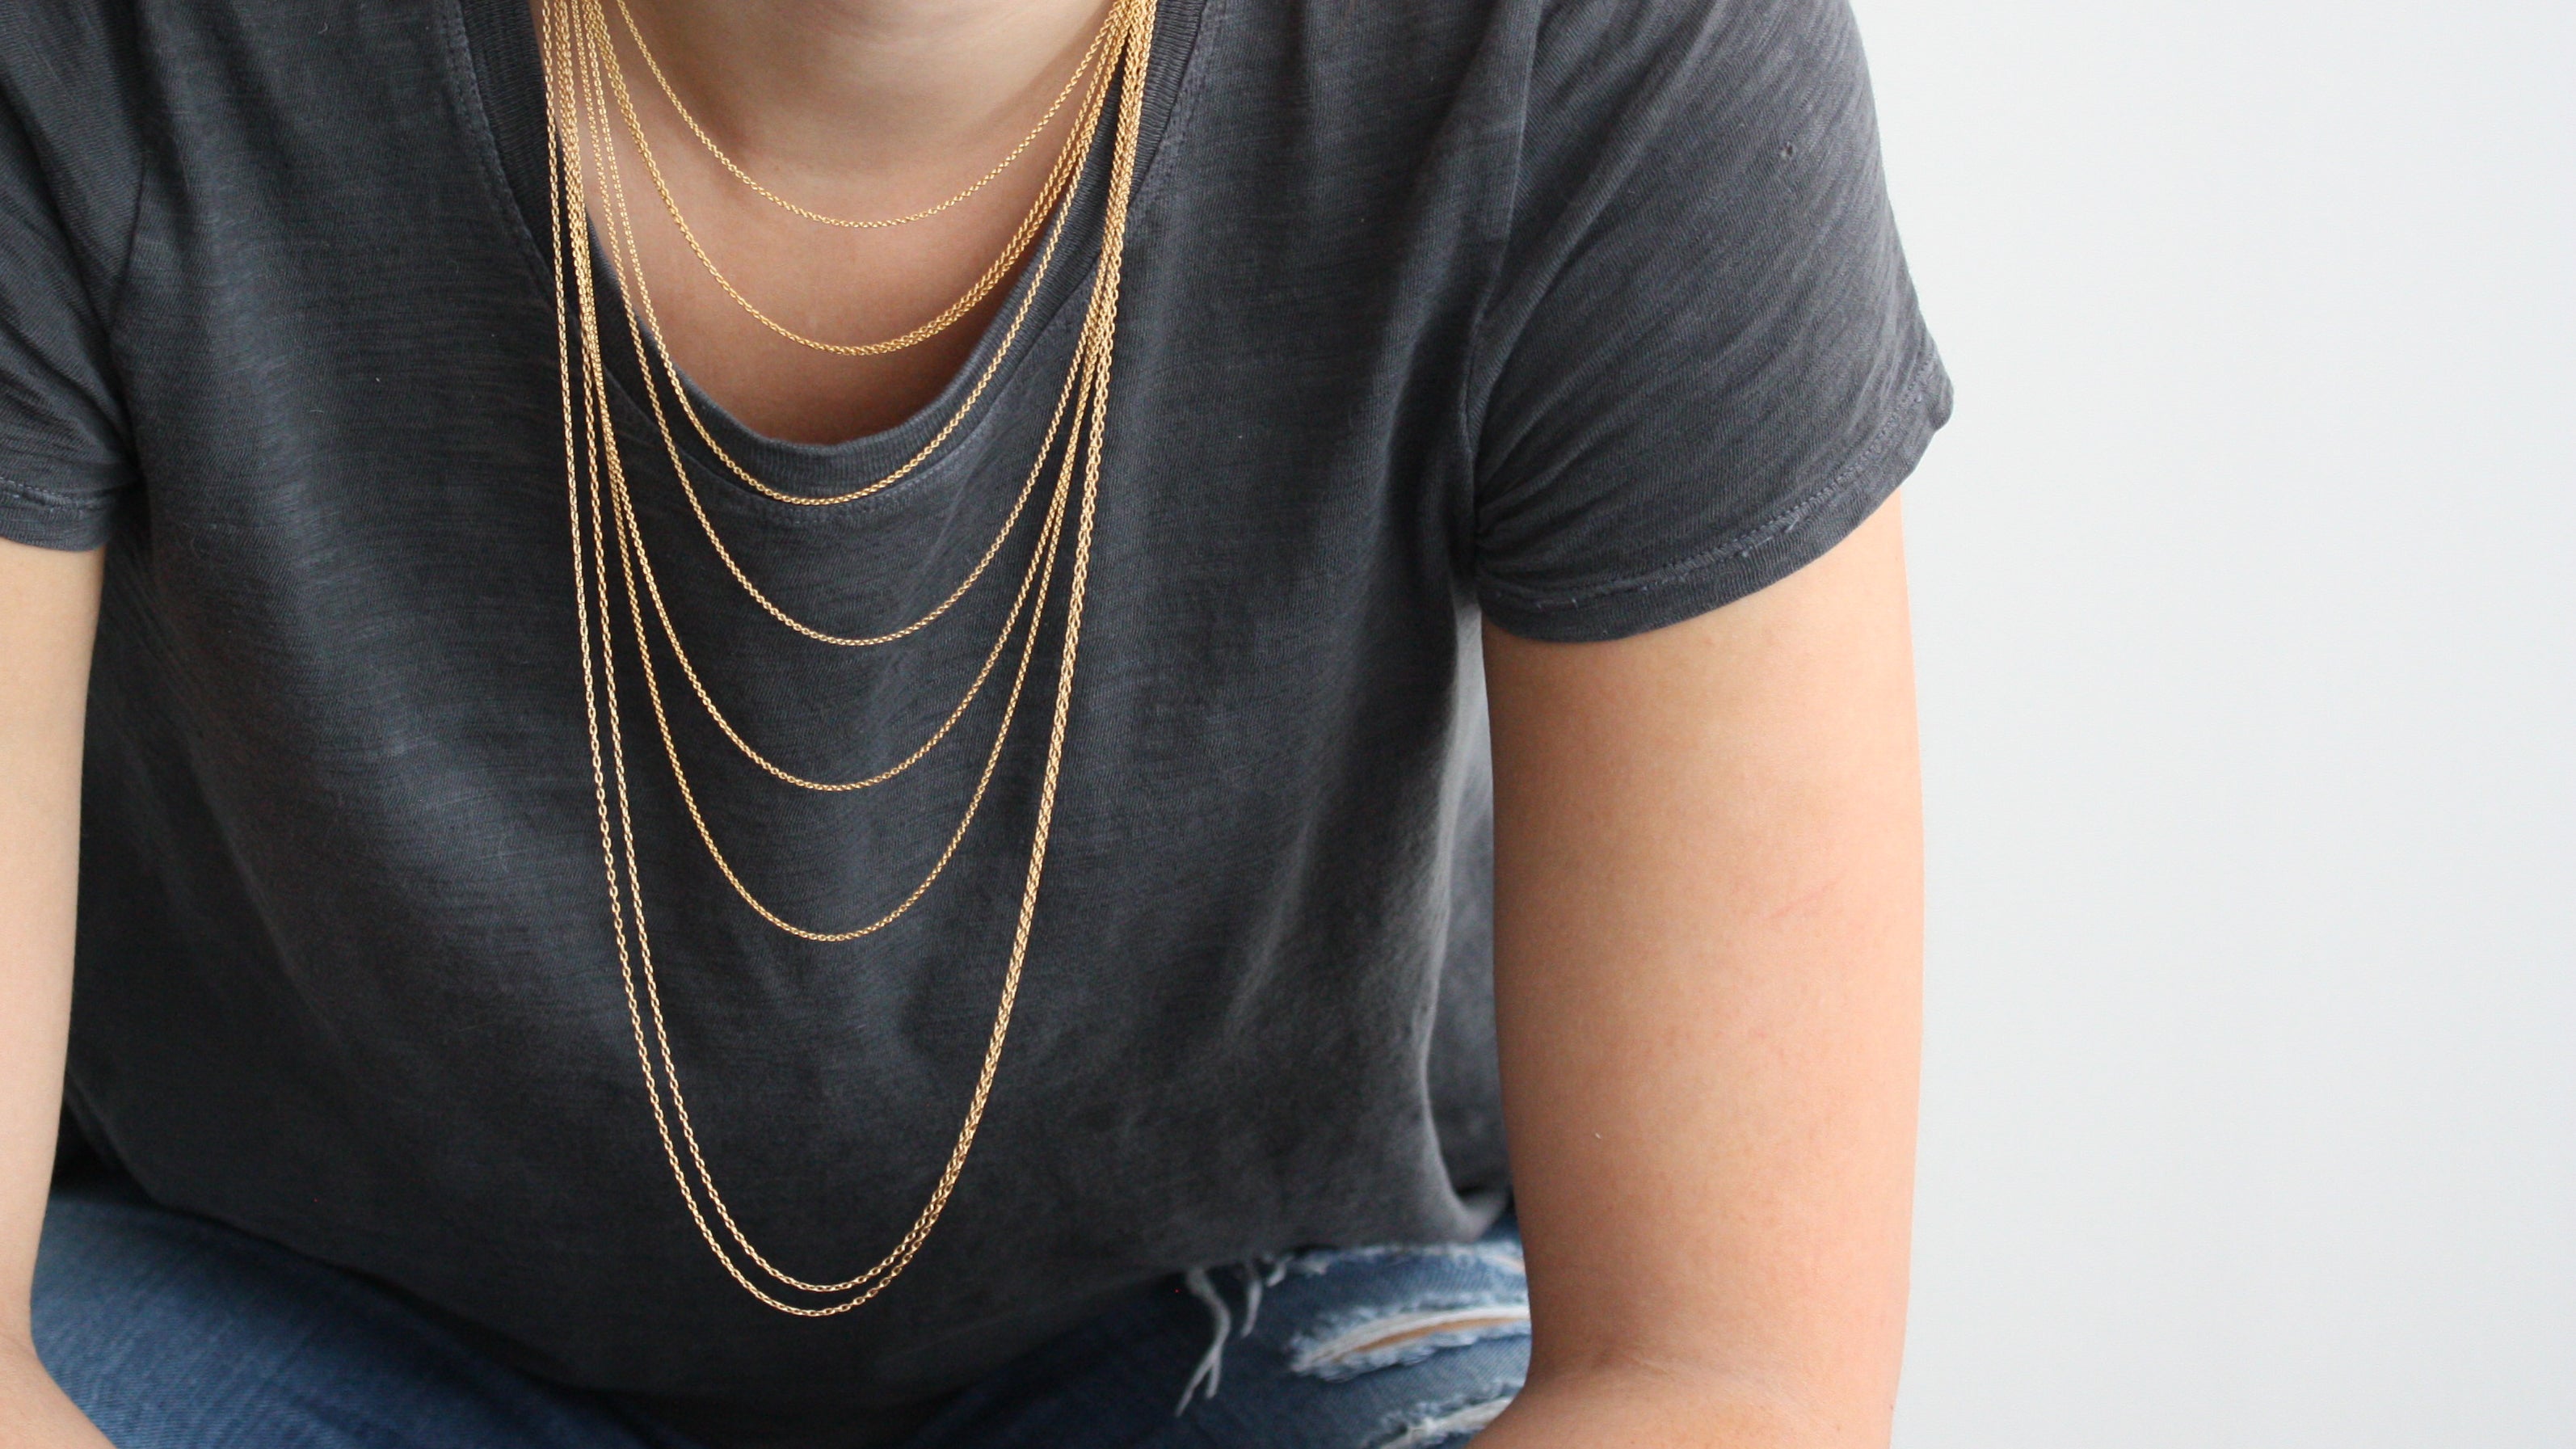 How to Layer Necklaces - Tips for Wearing More Than One Necklace